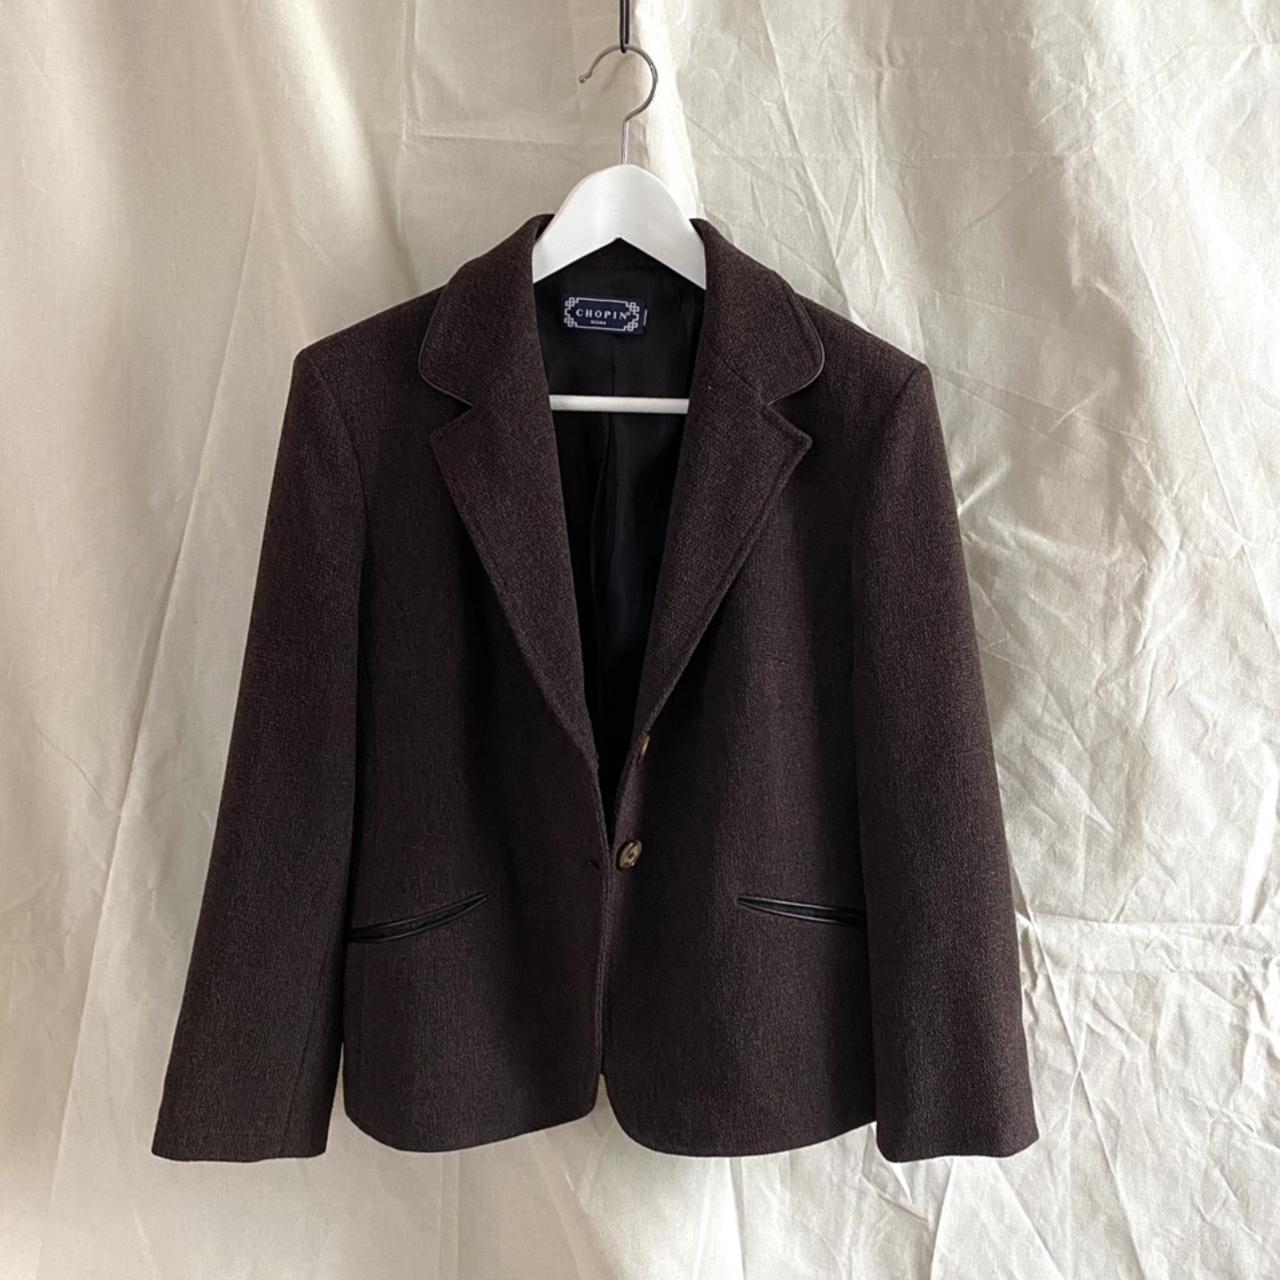 I sell this unique and stylish 80s/90s tweet vintage... - Depop